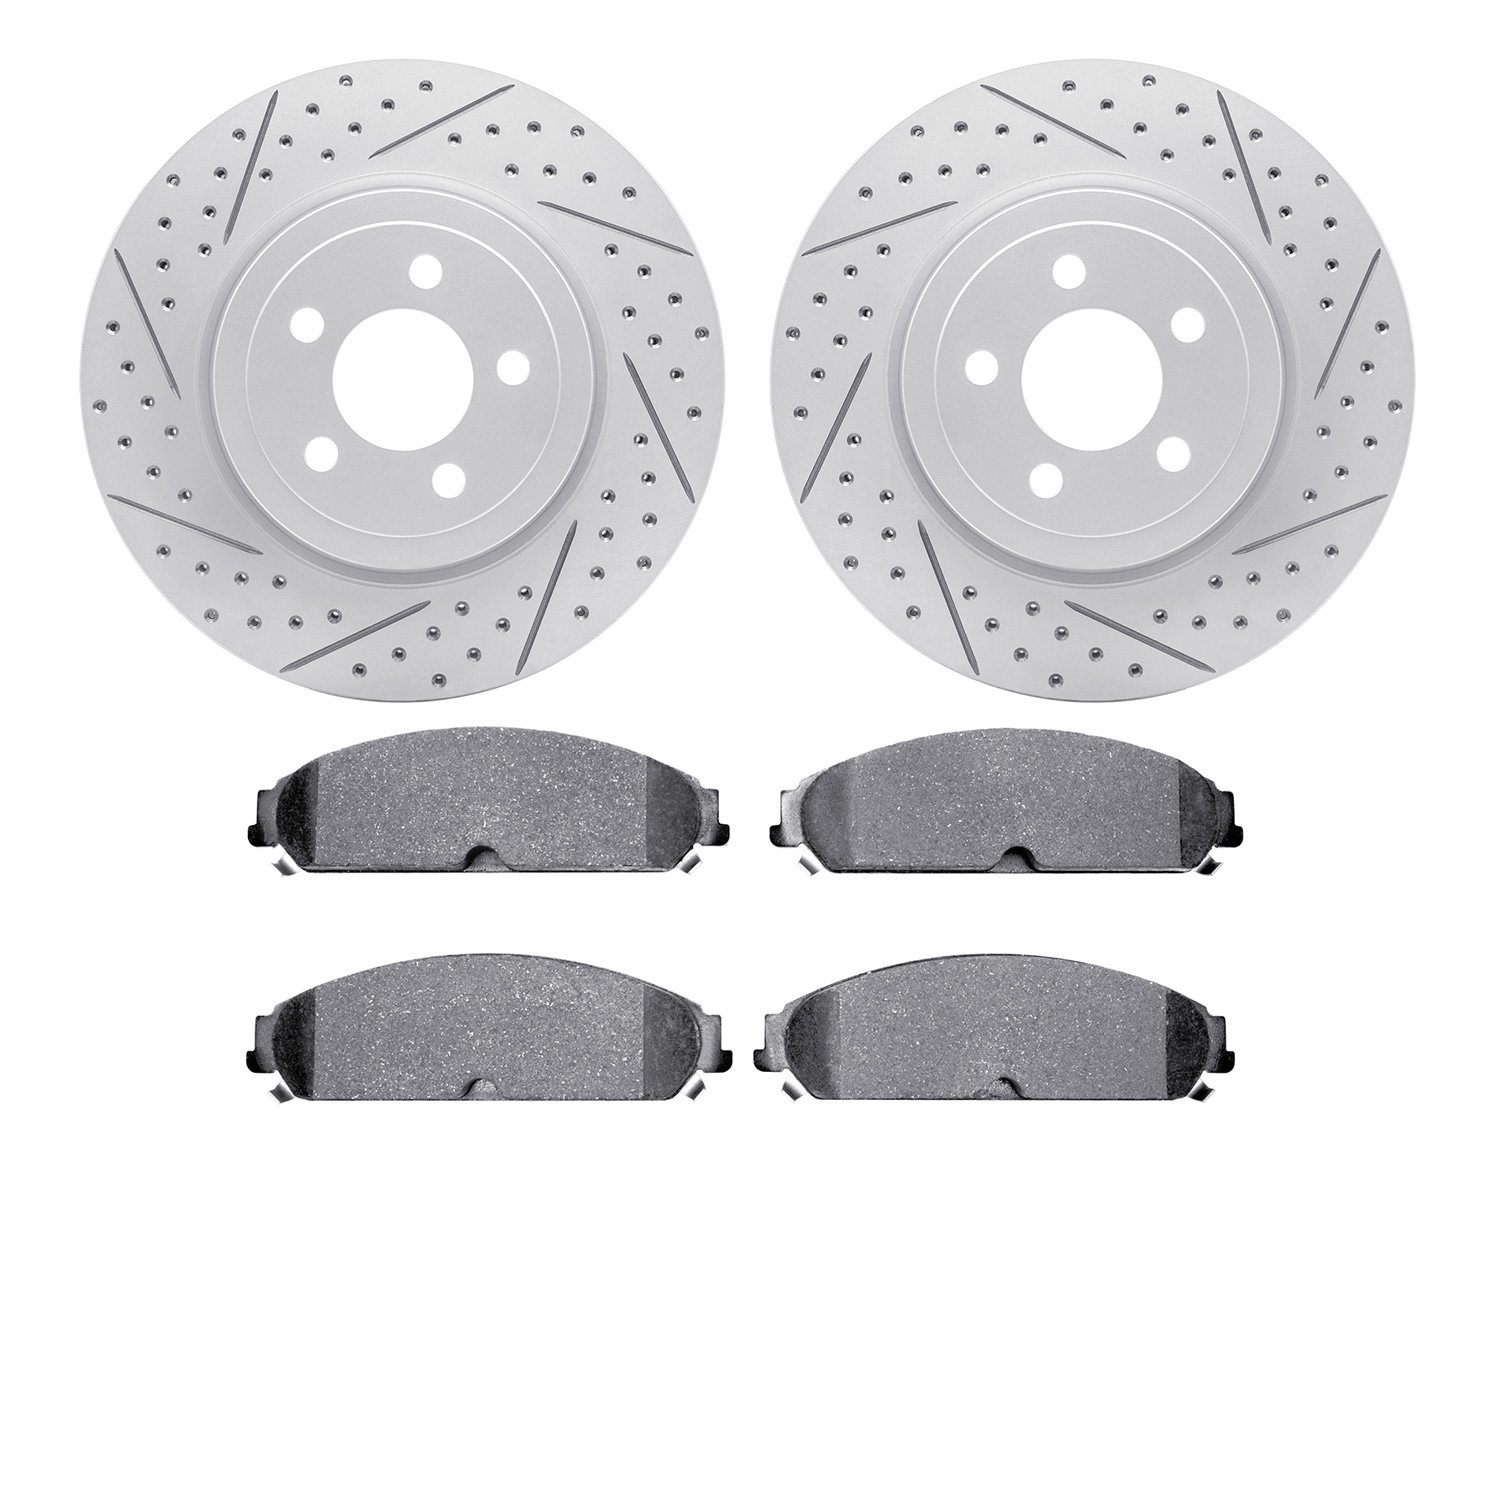 2202-39012 Geoperformance Drilled/Slotted Rotors w/Heavy-Duty Pads Kit, Fits Select Mopar, Position: Front